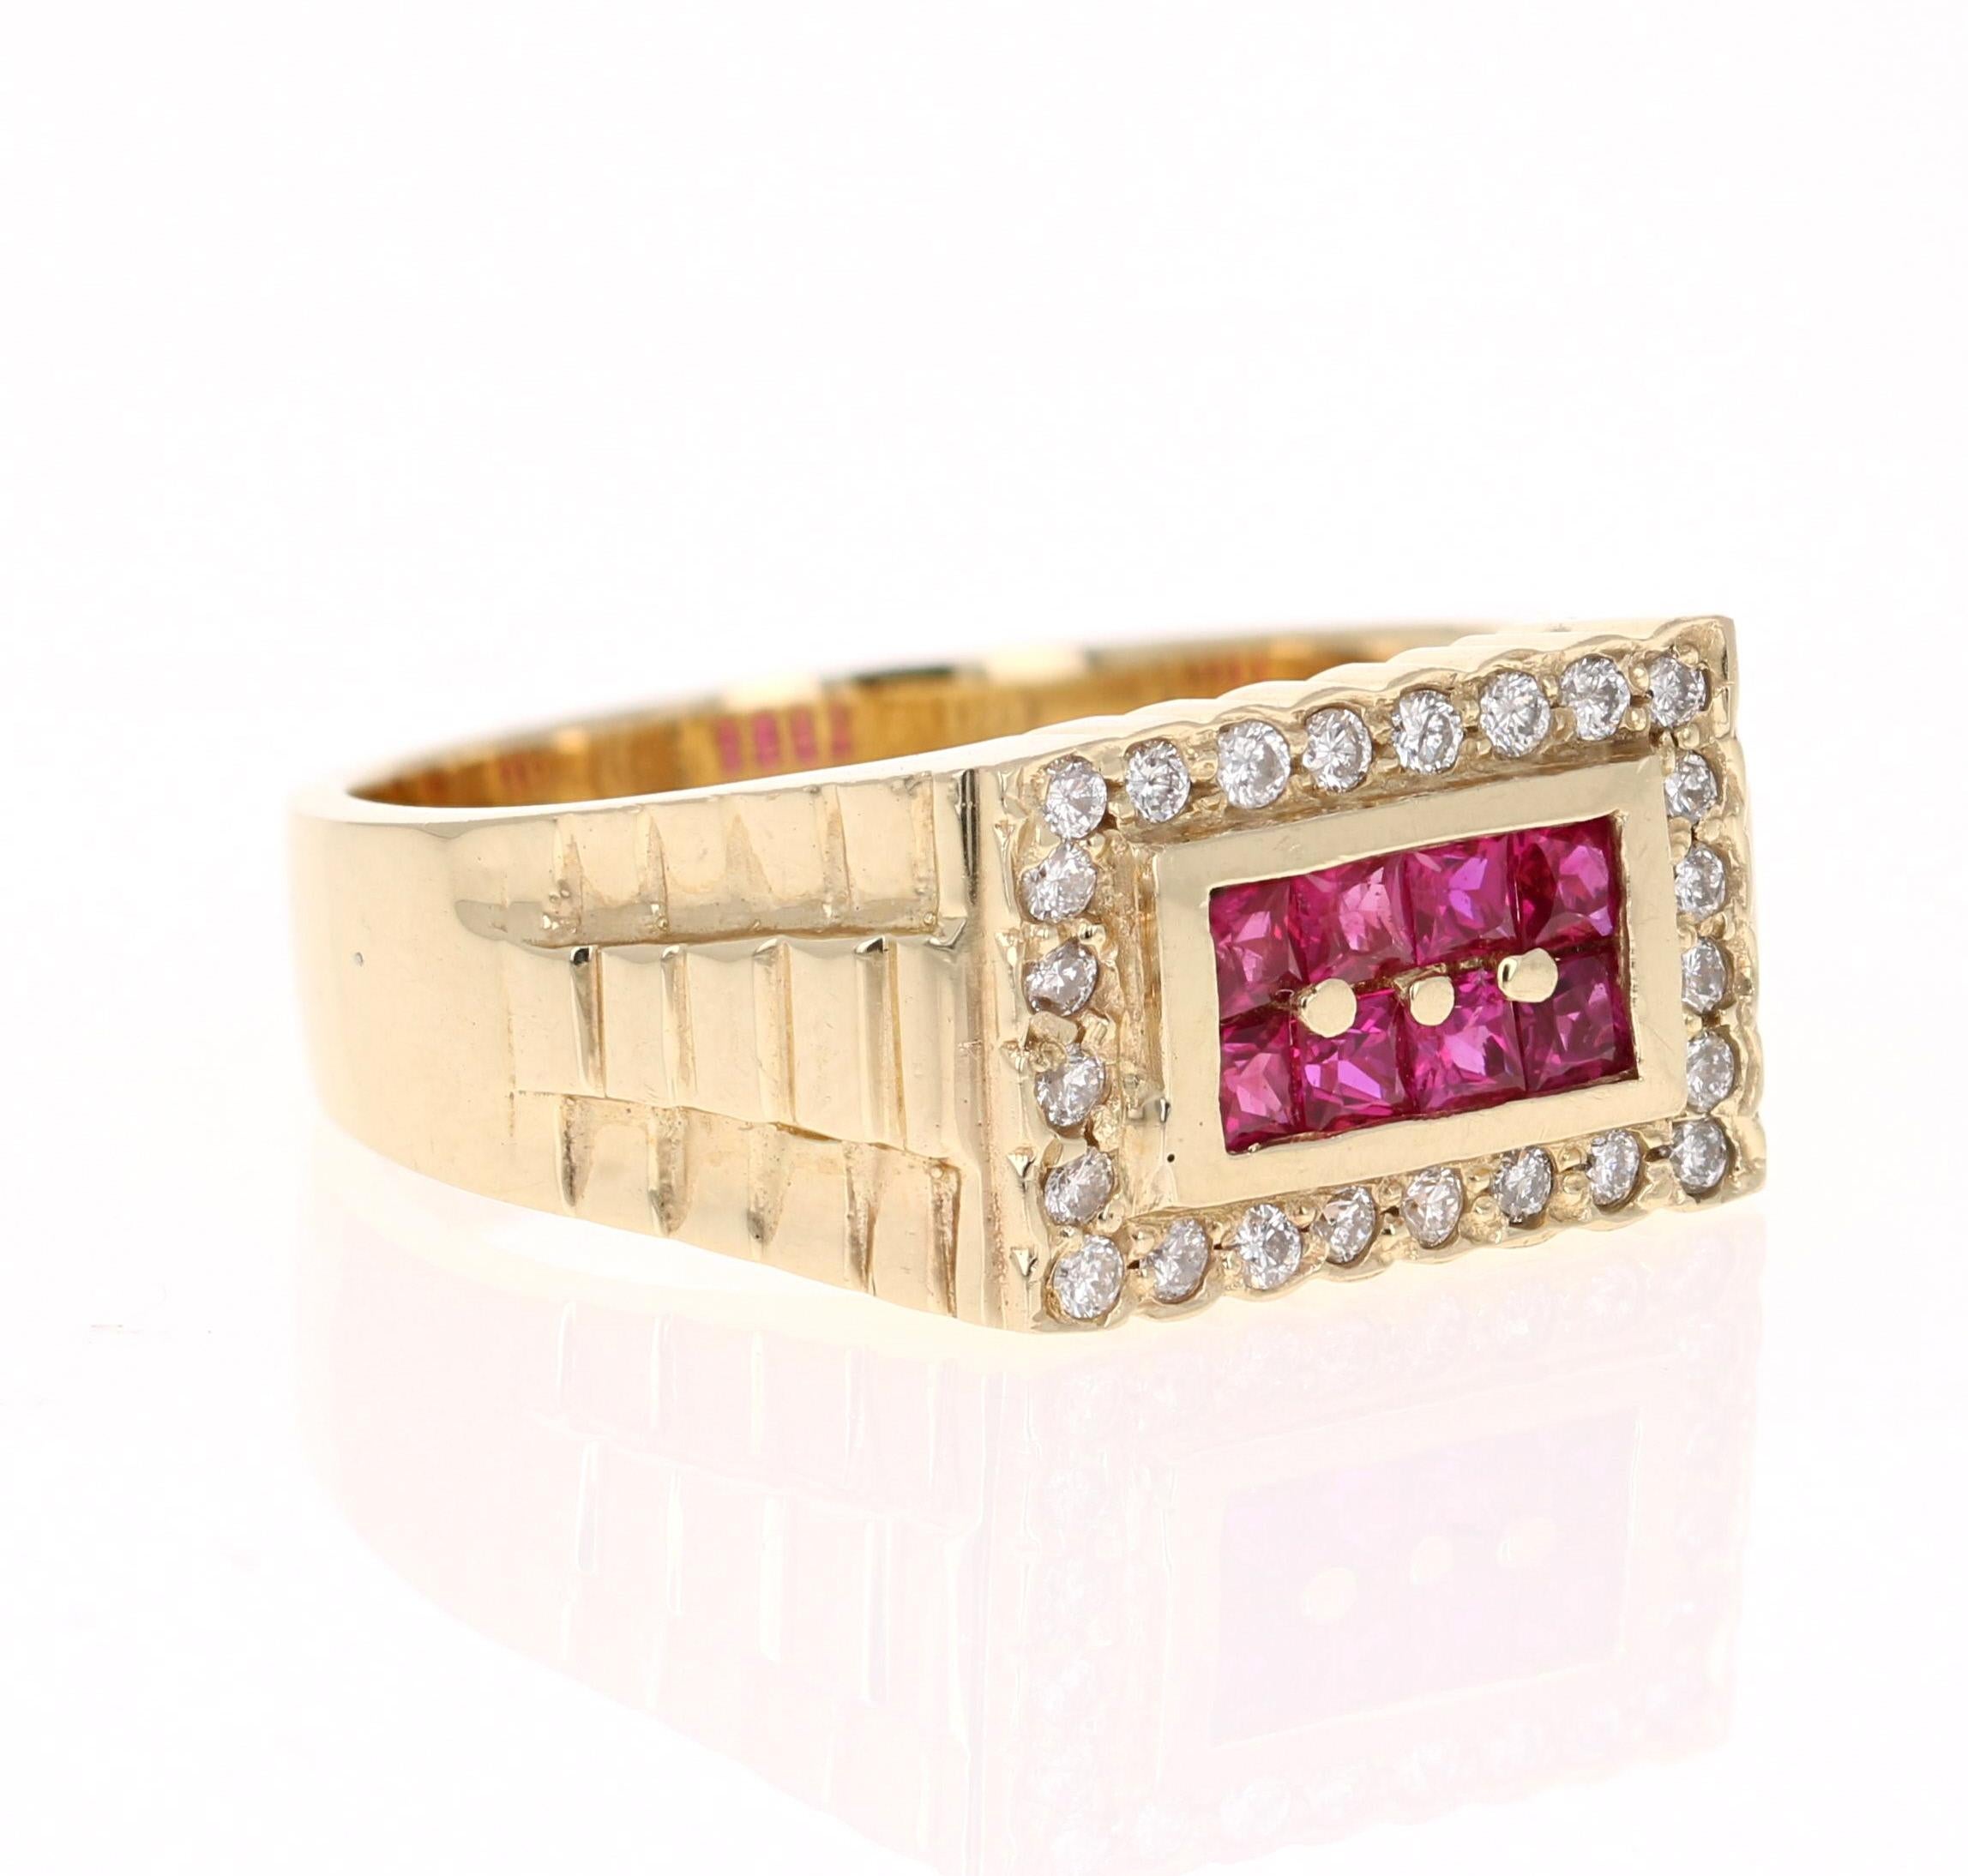 
This amazing piece is set with 8 Rubies that weigh 0.62 Carats and 24 Round Cut Diamonds that weigh 0.29 Carats. The Total Carat Weight of the ring is 0.91 Carats. 

It is beautifully curated in 14 Karat Yellow Gold and weighs approximately 10.1